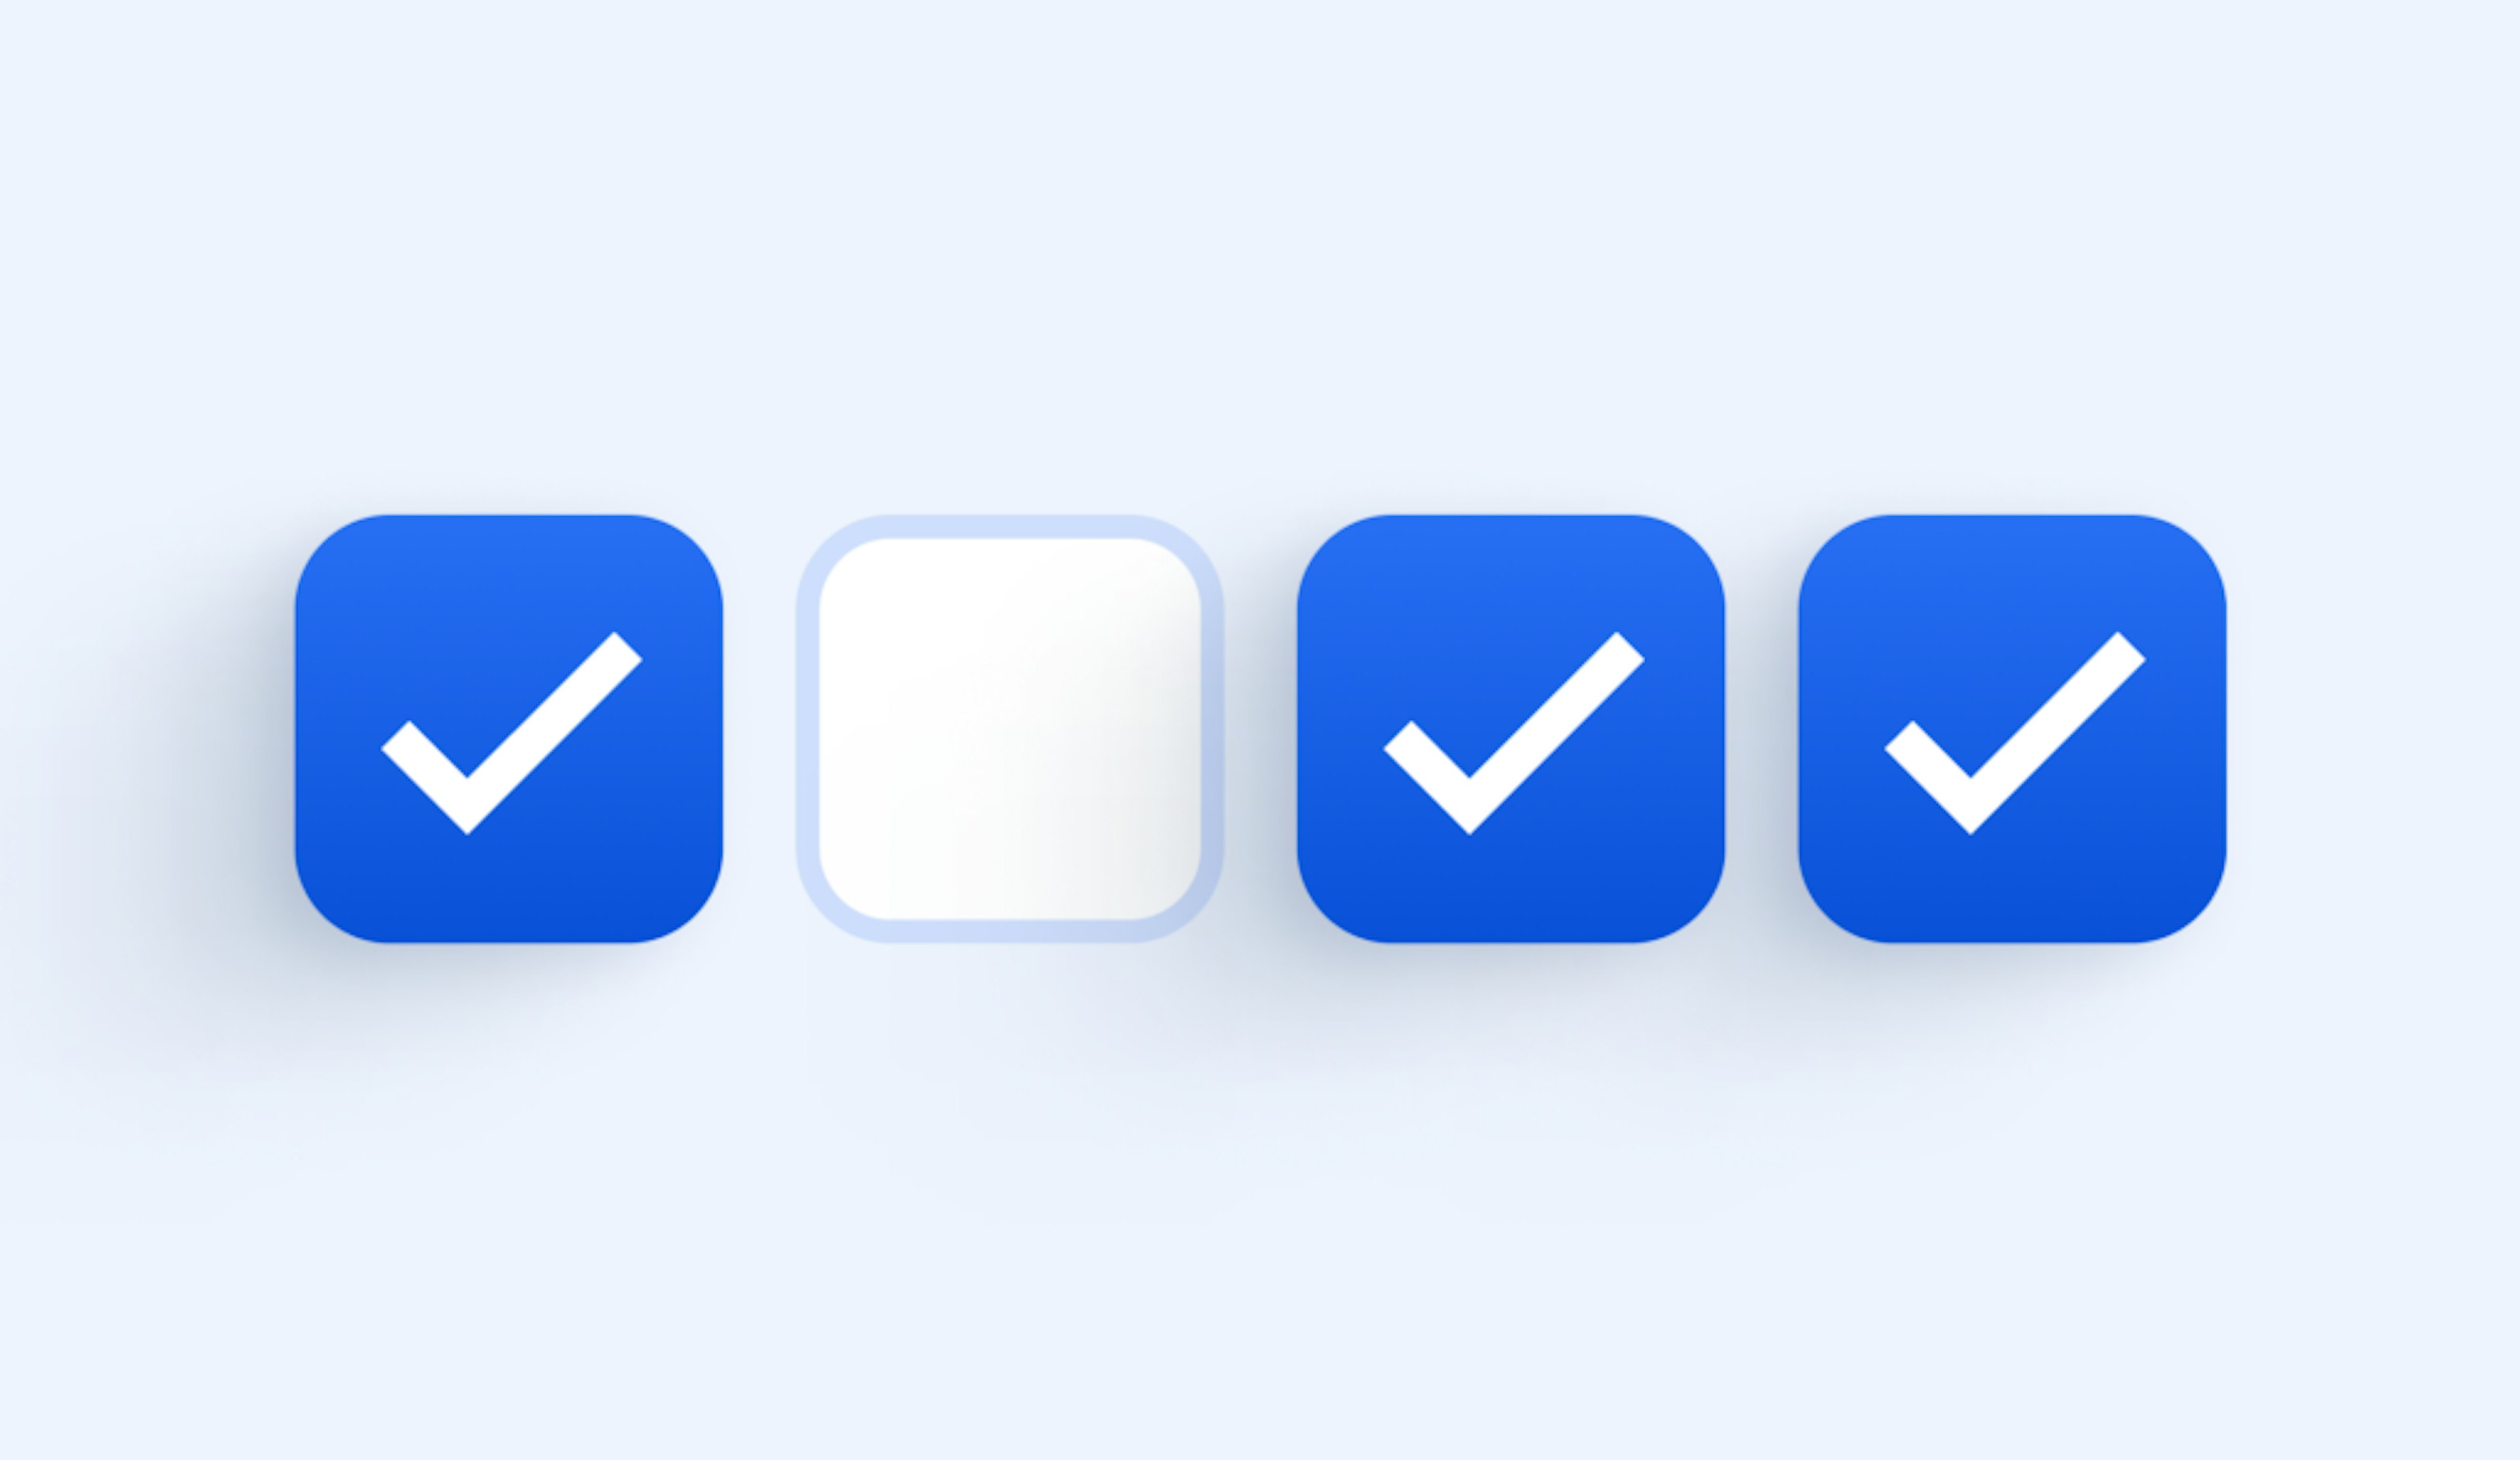 Four checkmark boxes, three are ticked